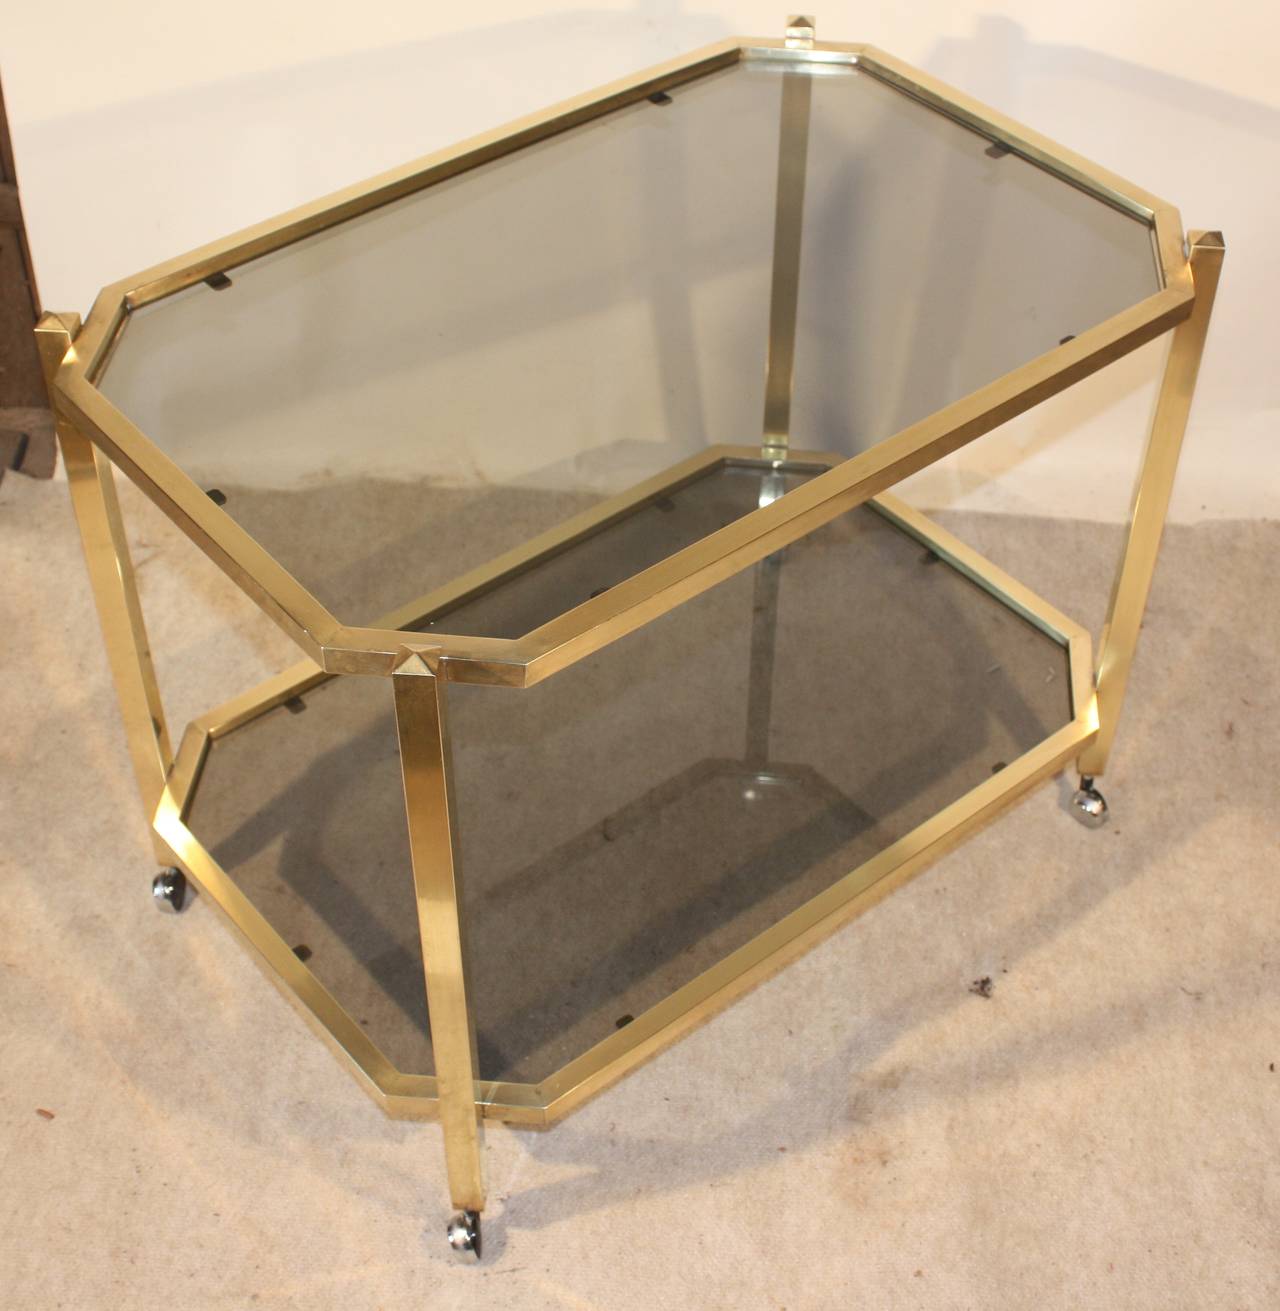 A modernist mid-century brass and smoked glass drinks cart, circa 1960, French, with chrome casters.